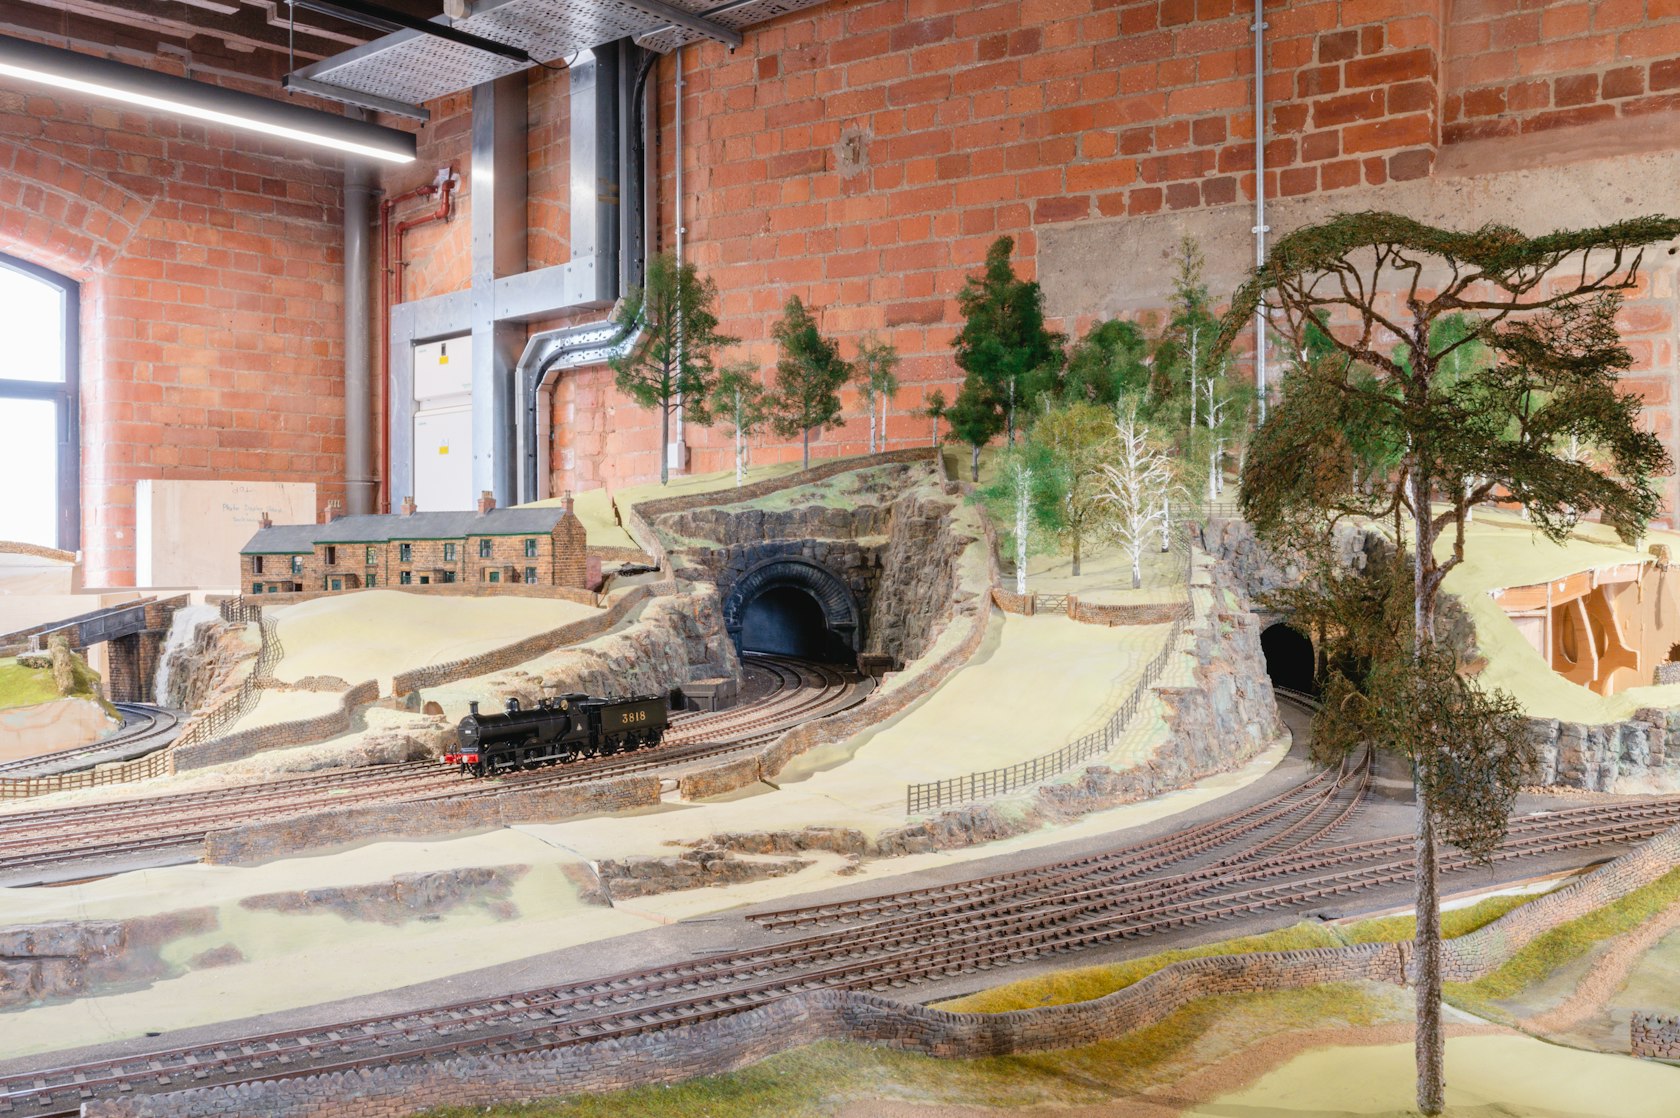 Railways Revealed at the Museum of Making &#8211; image 78 [c] Speller Metcalfe-Derby Museums